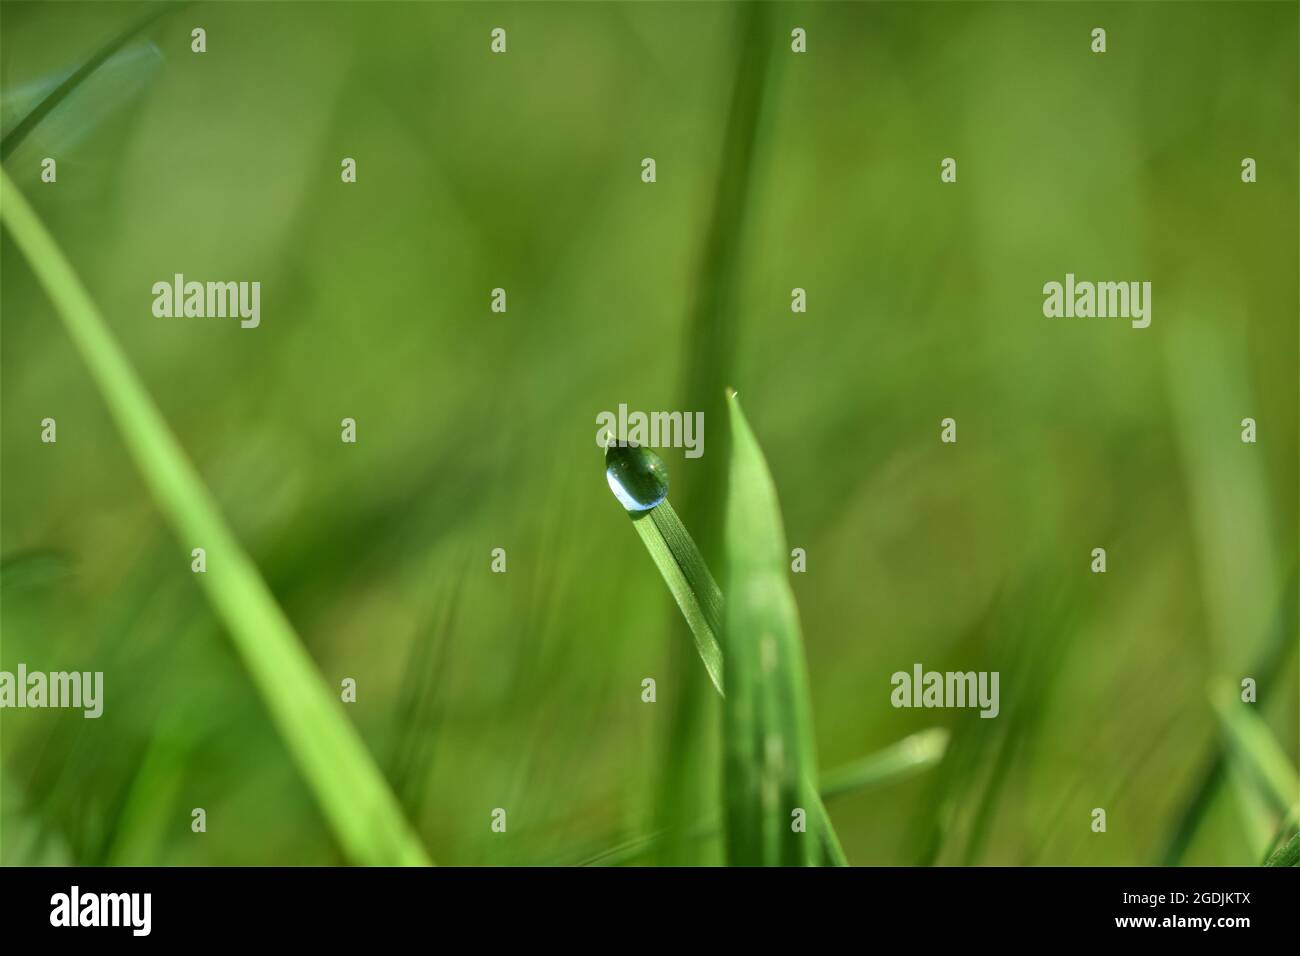 Dew drop on blade of grass against a green blurred background Stock Photo